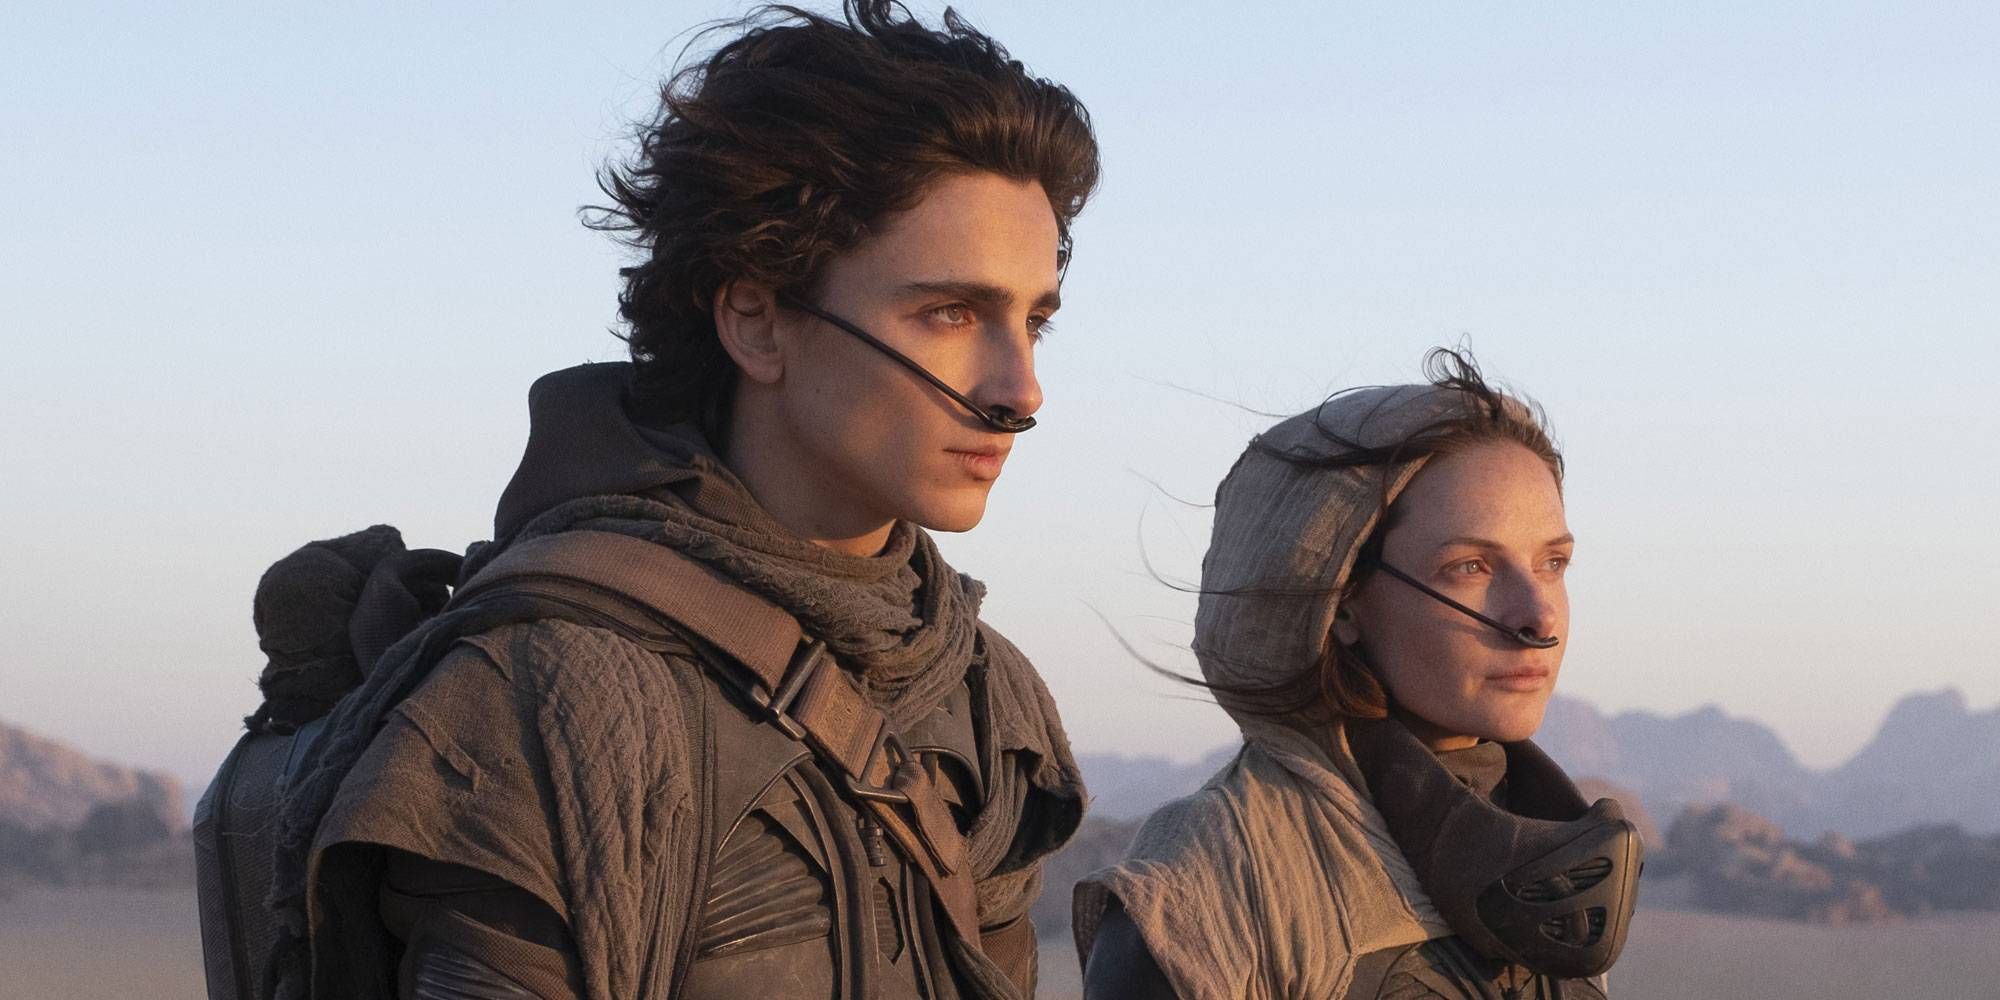 Timothée Chalamet as Paul and Rebecca Ferguson as Jessica in Dune looking at the horizon.